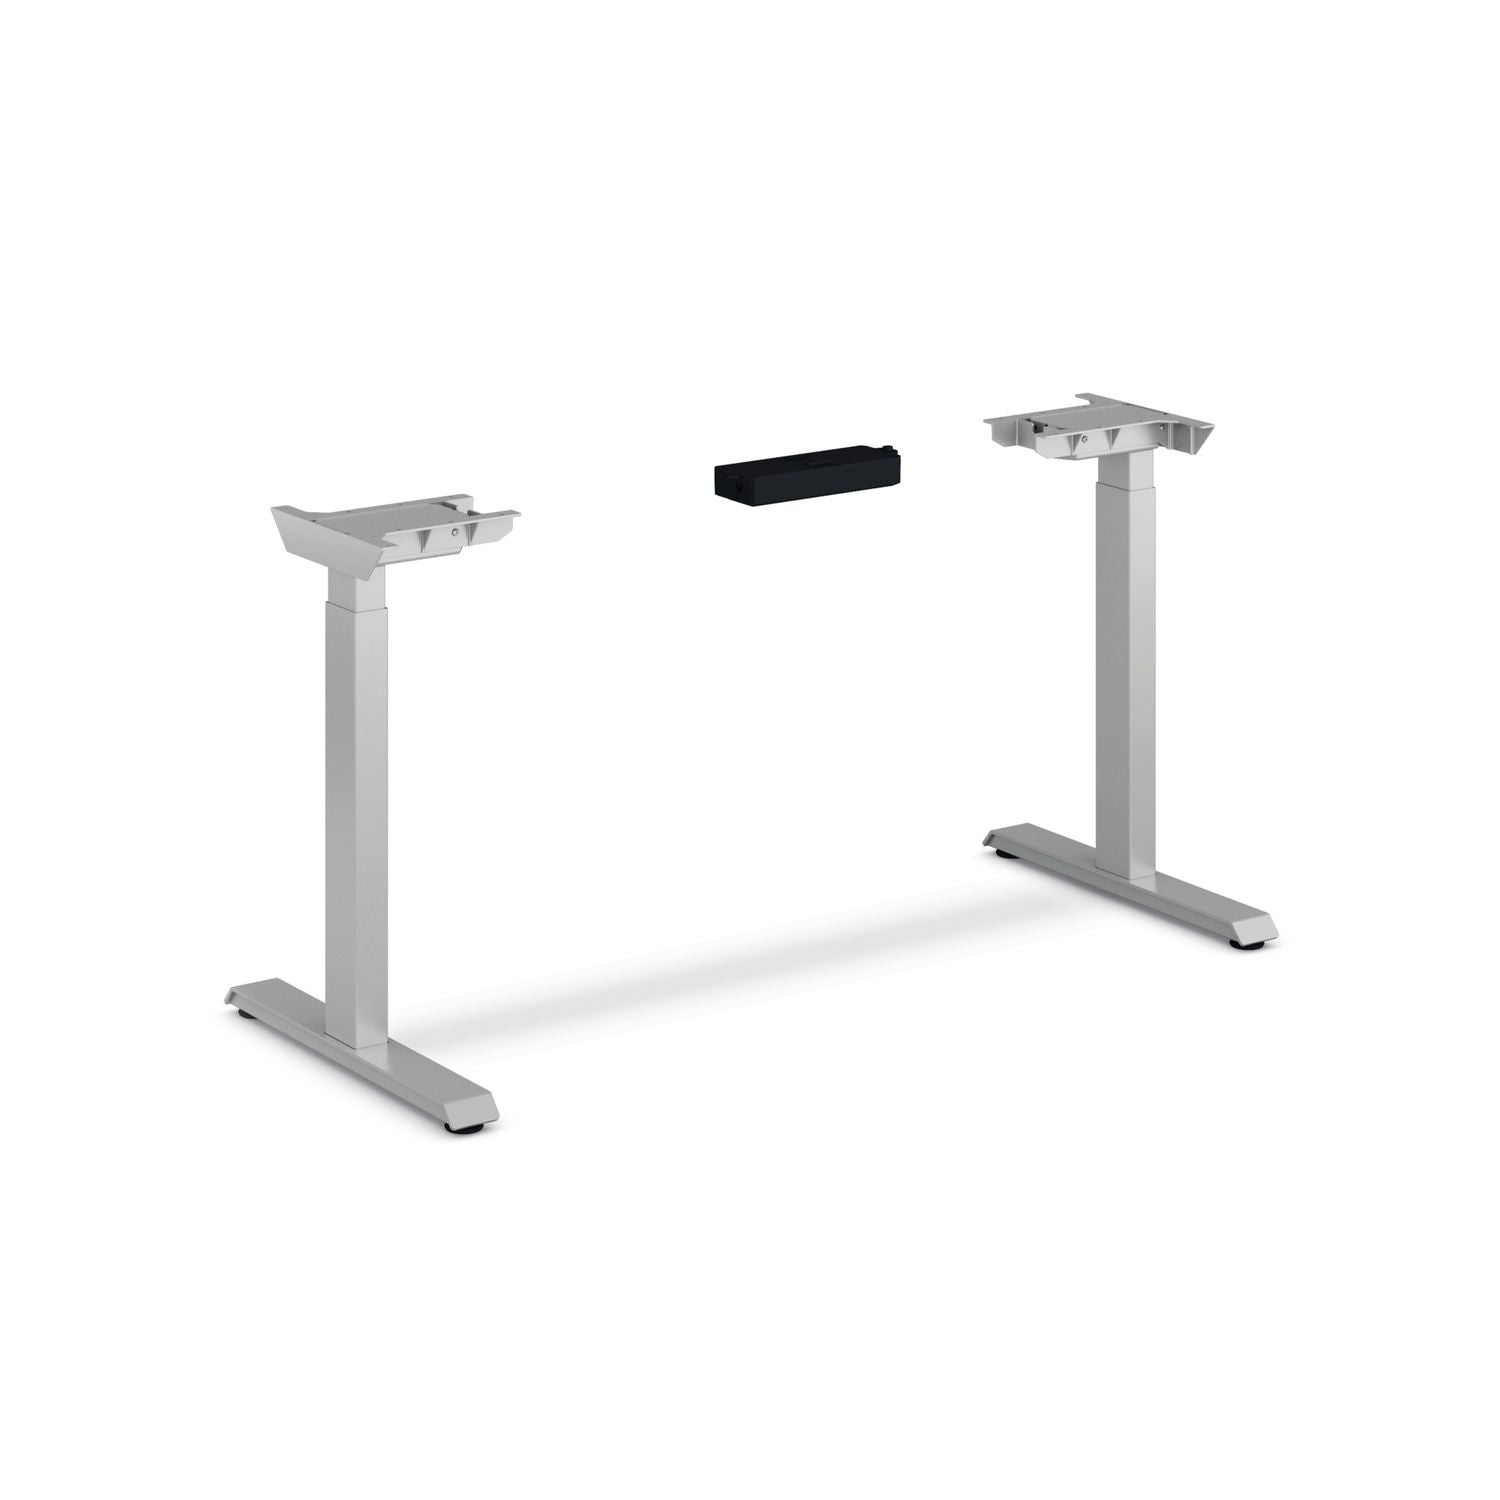 coordinate-height-adjustable-desk-bundle-2-stage-58-x-22-x-2775-to-47-pinnacle\\silver-ships-in-7-10-business-days_honhat2spns2258 - 3